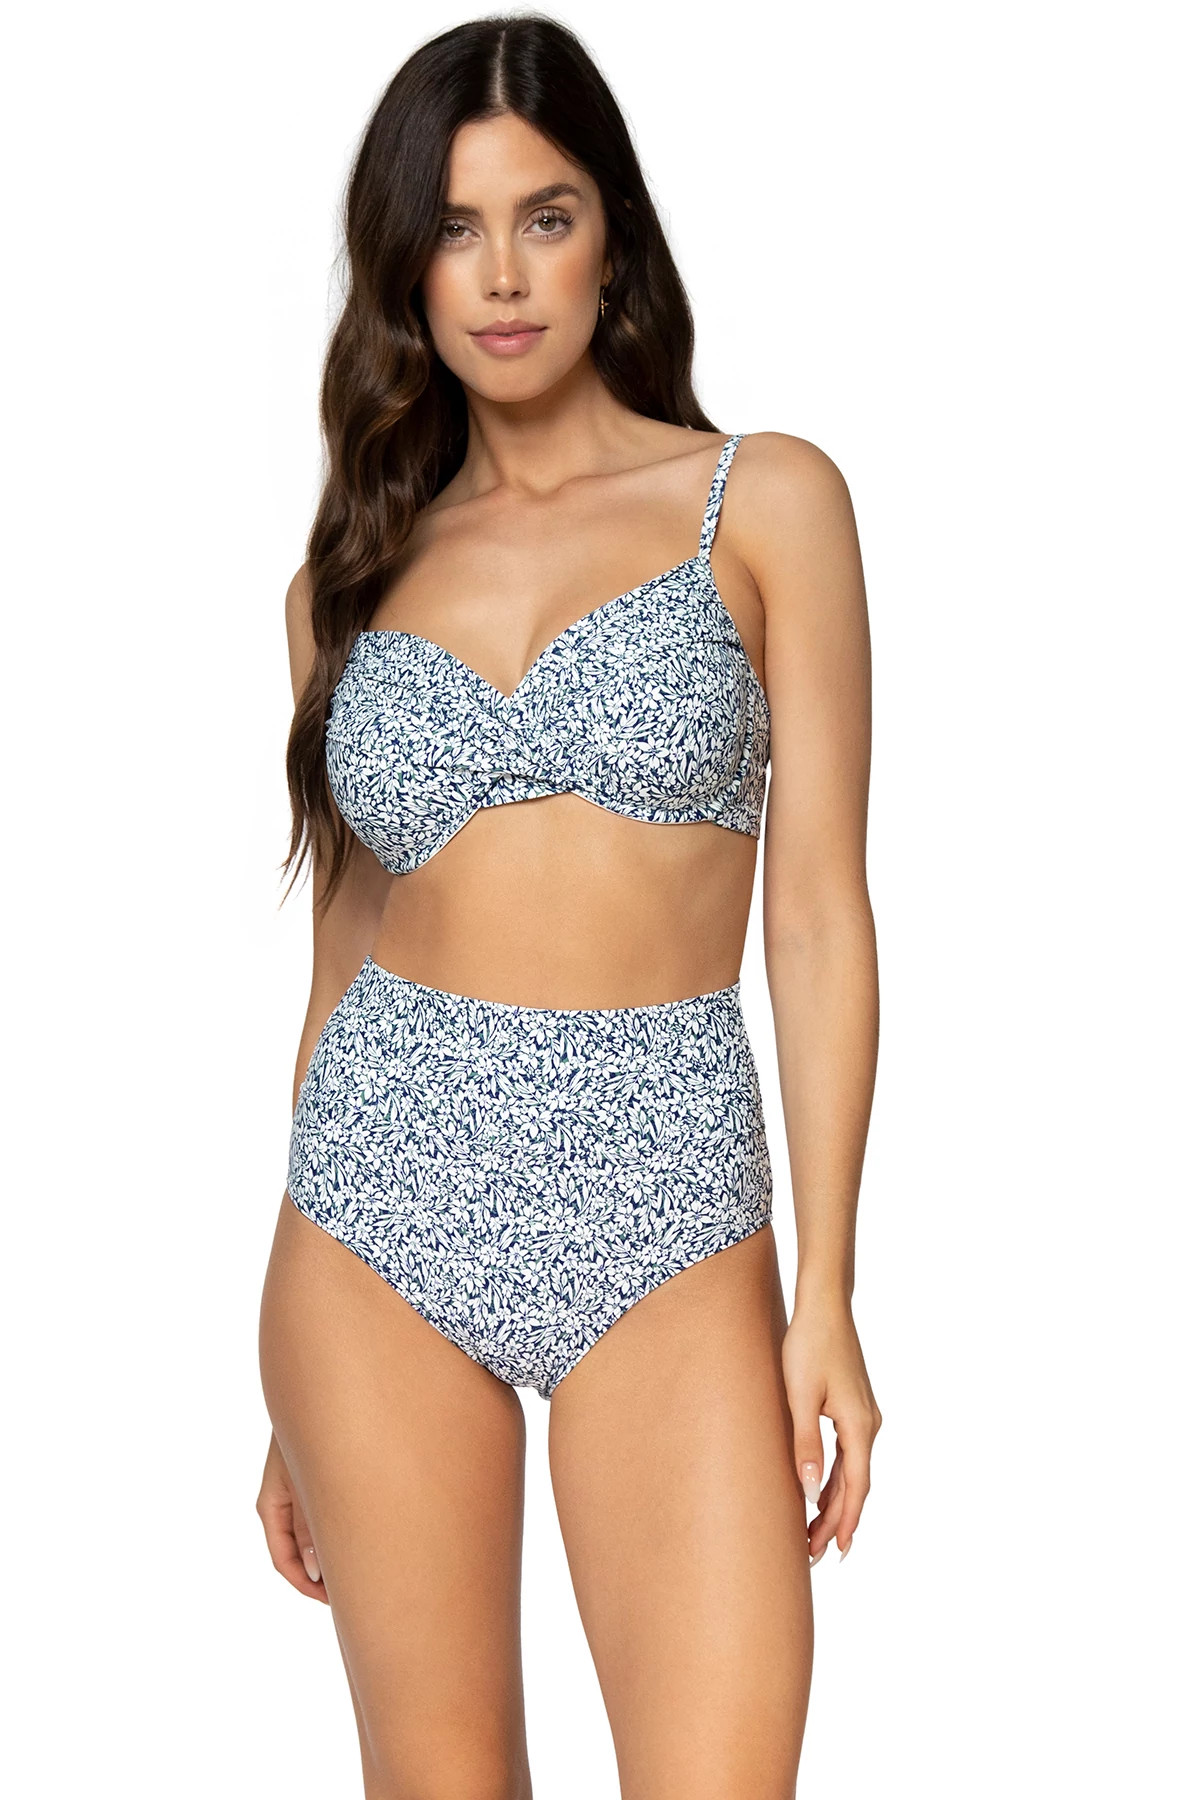 FORGET ME NOT Crossroads Underwire Bikini Top (D+ Cup) image number 1